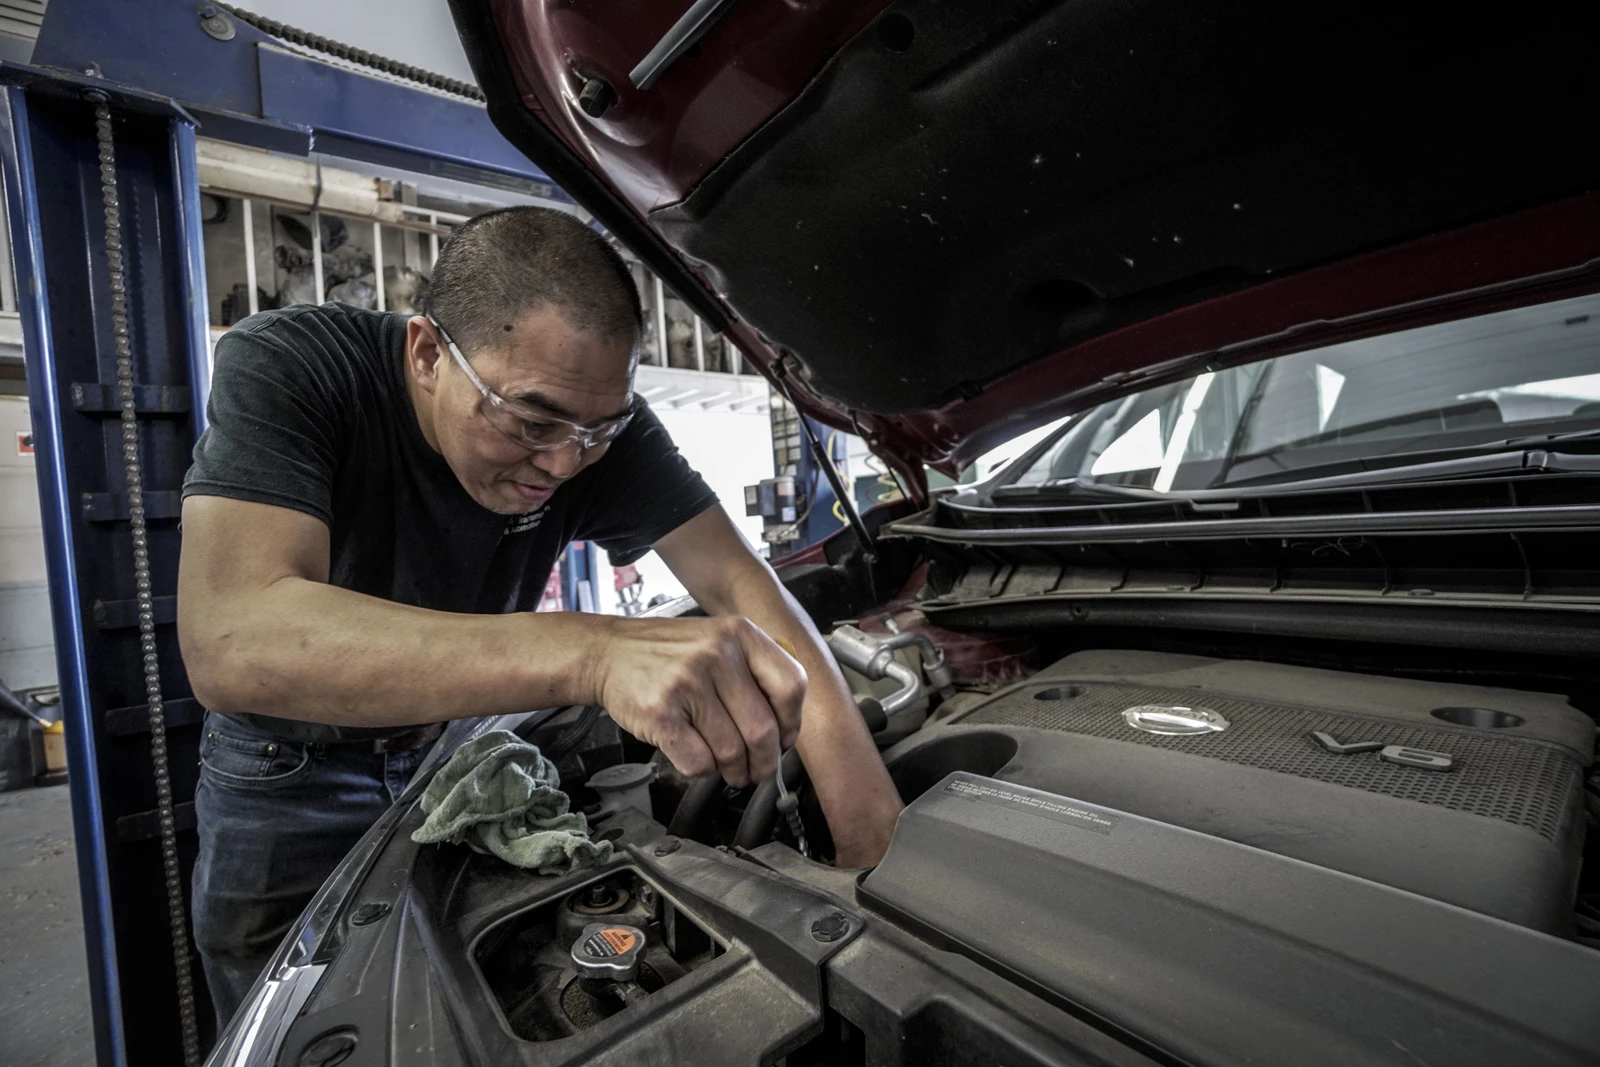 A mechanic checking the engine of a car on a ramp during an MOT test